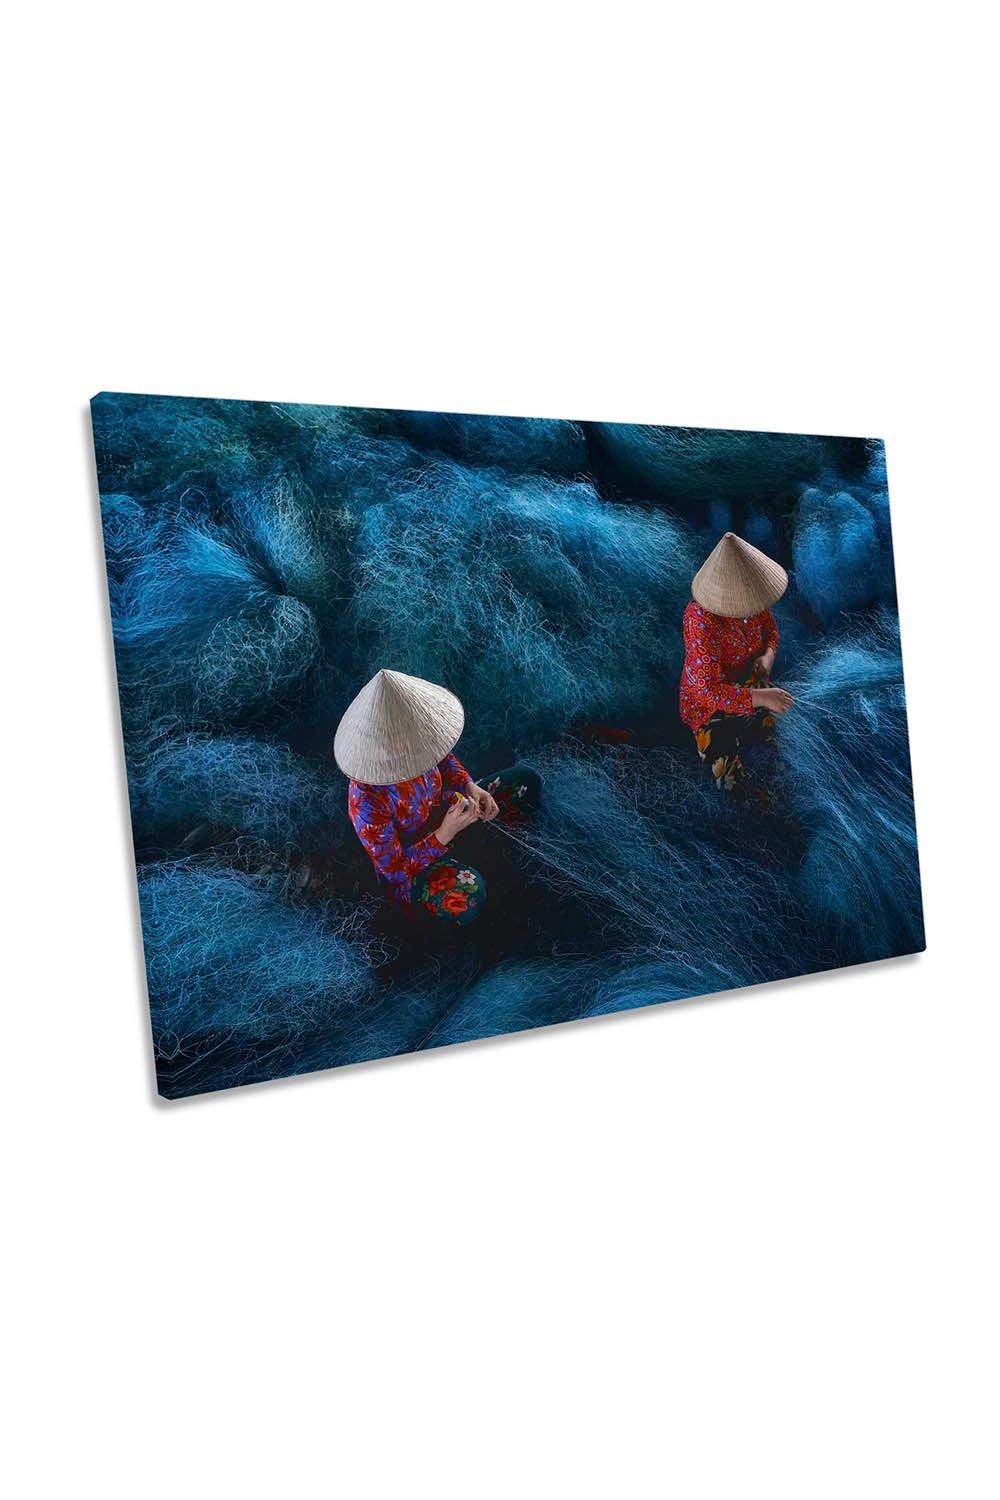 Net Mending Asia Traditional Blue Canvas Wall Art Picture Print